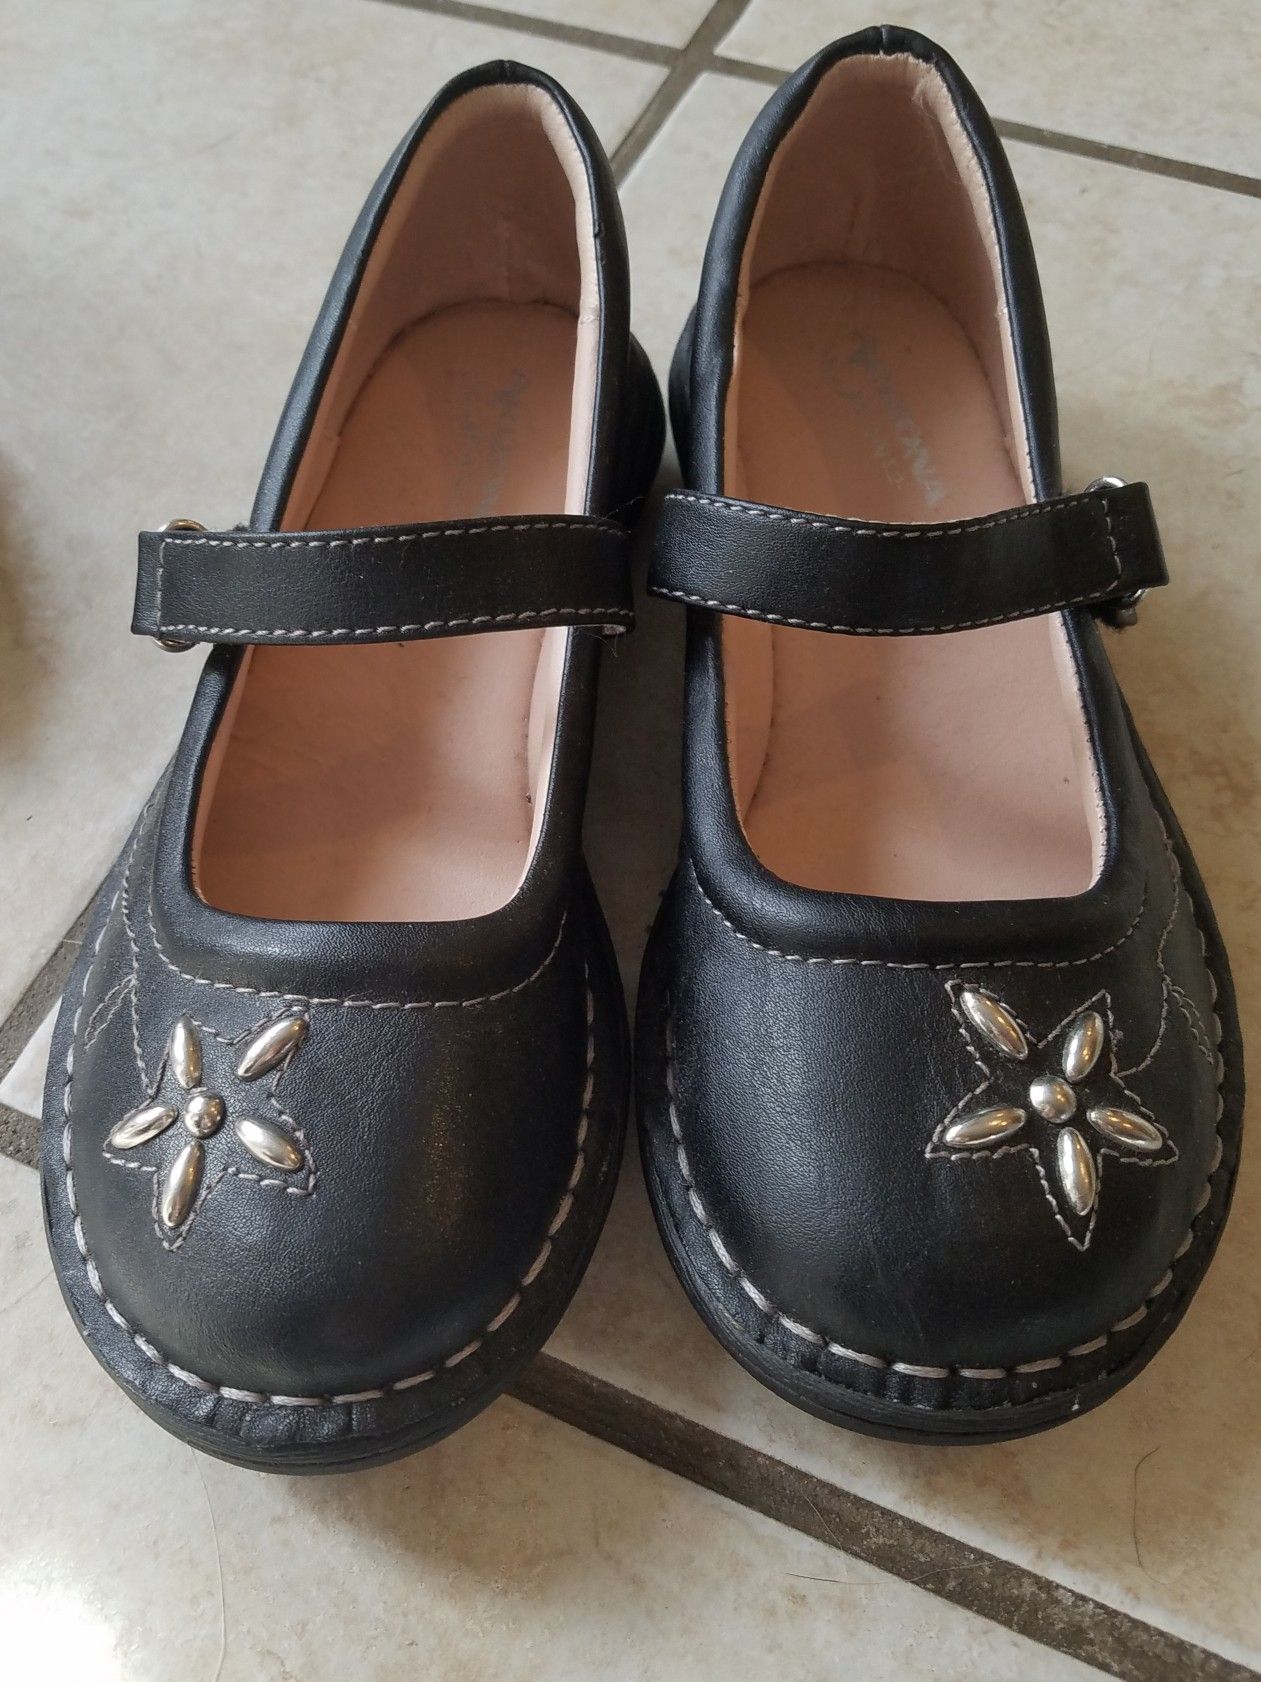 Girls size 1 blue dress shoes never wore. Danskin shoes used condition